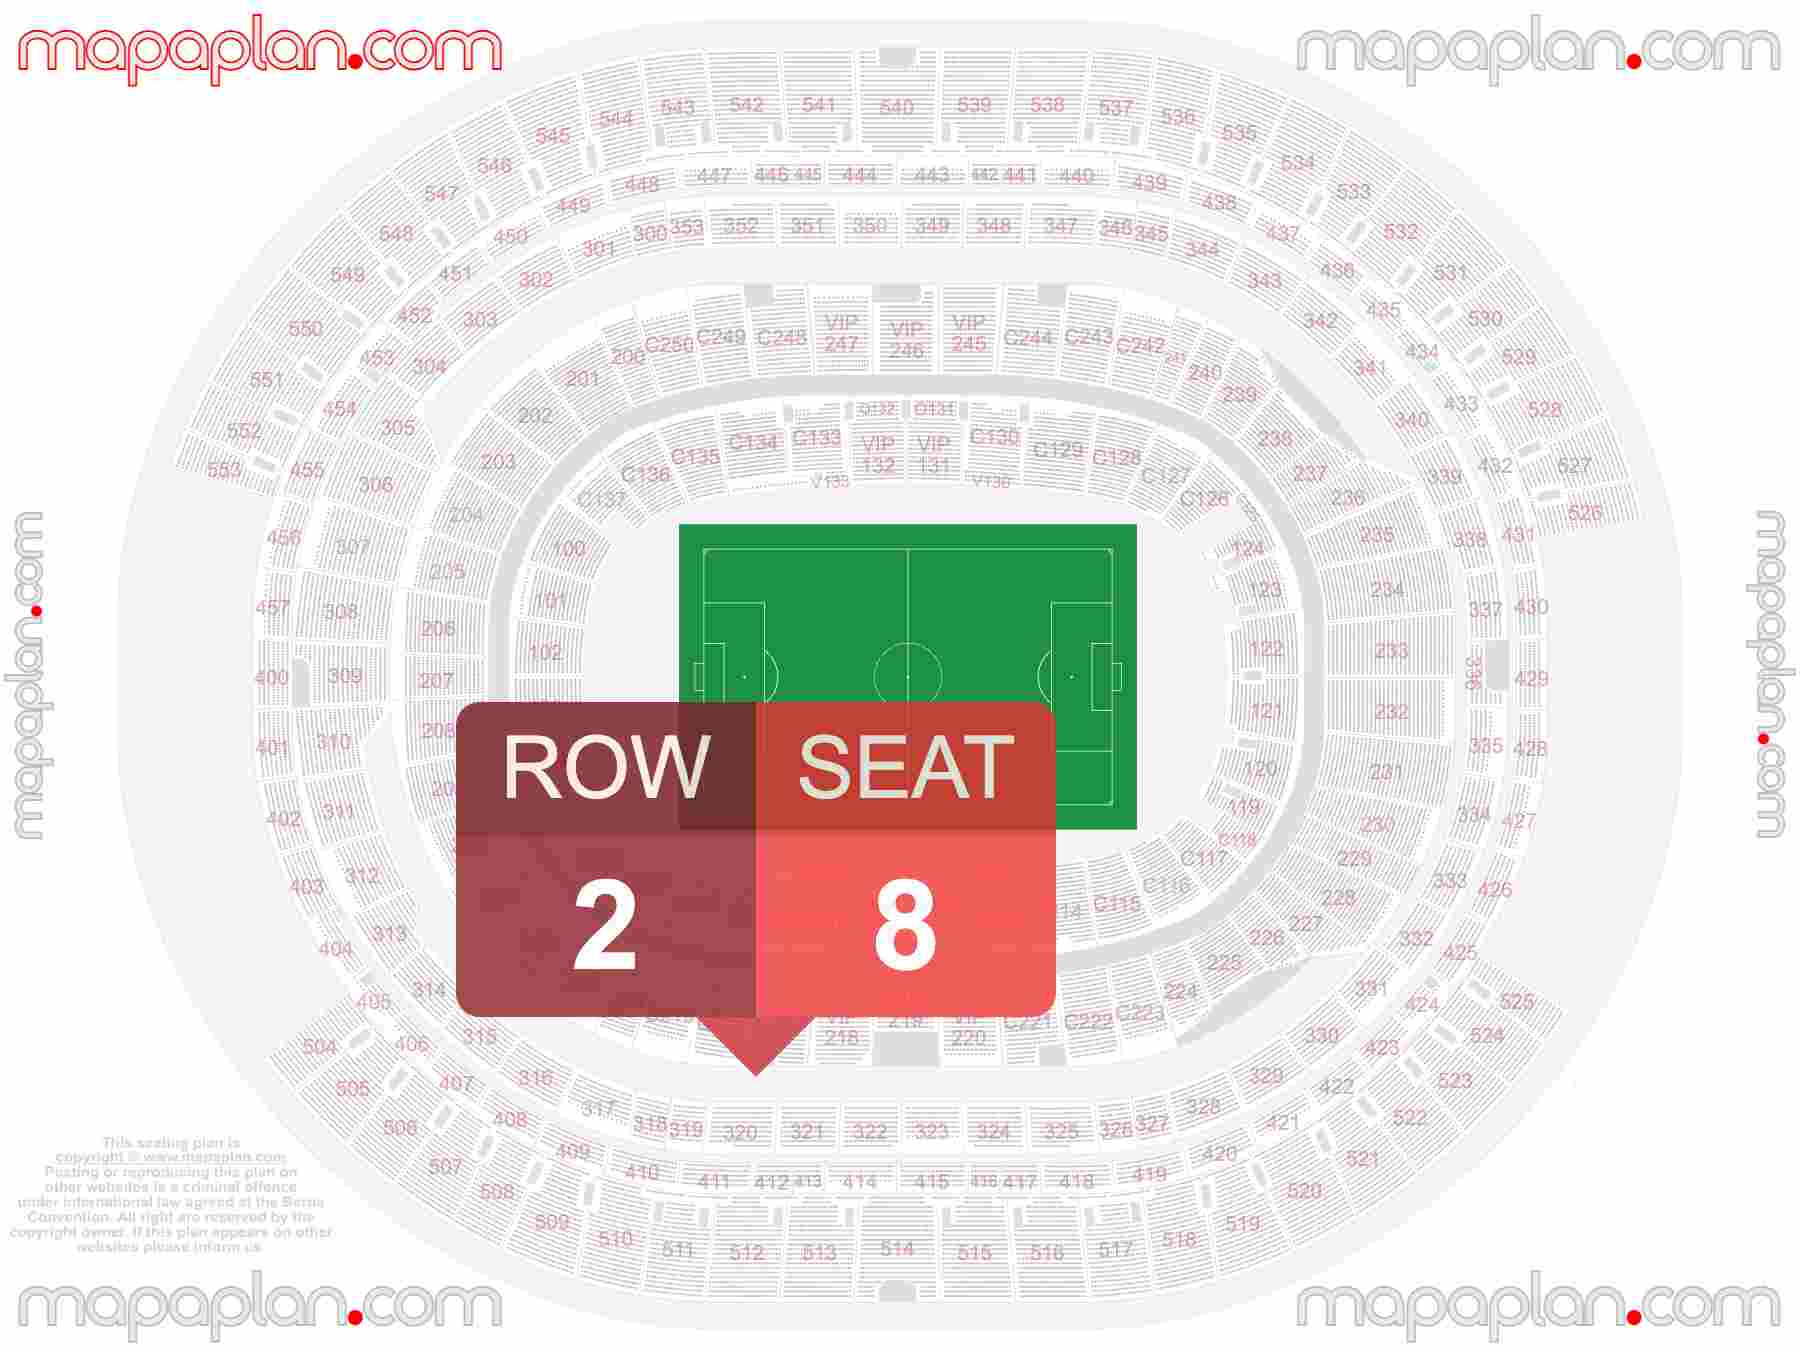 Los Angeles SoFi Stadium seating chart Soccer game match inside capacity view arrangement plan - Interactive virtual 3d best seats & rows detailed stadium image configuration layout